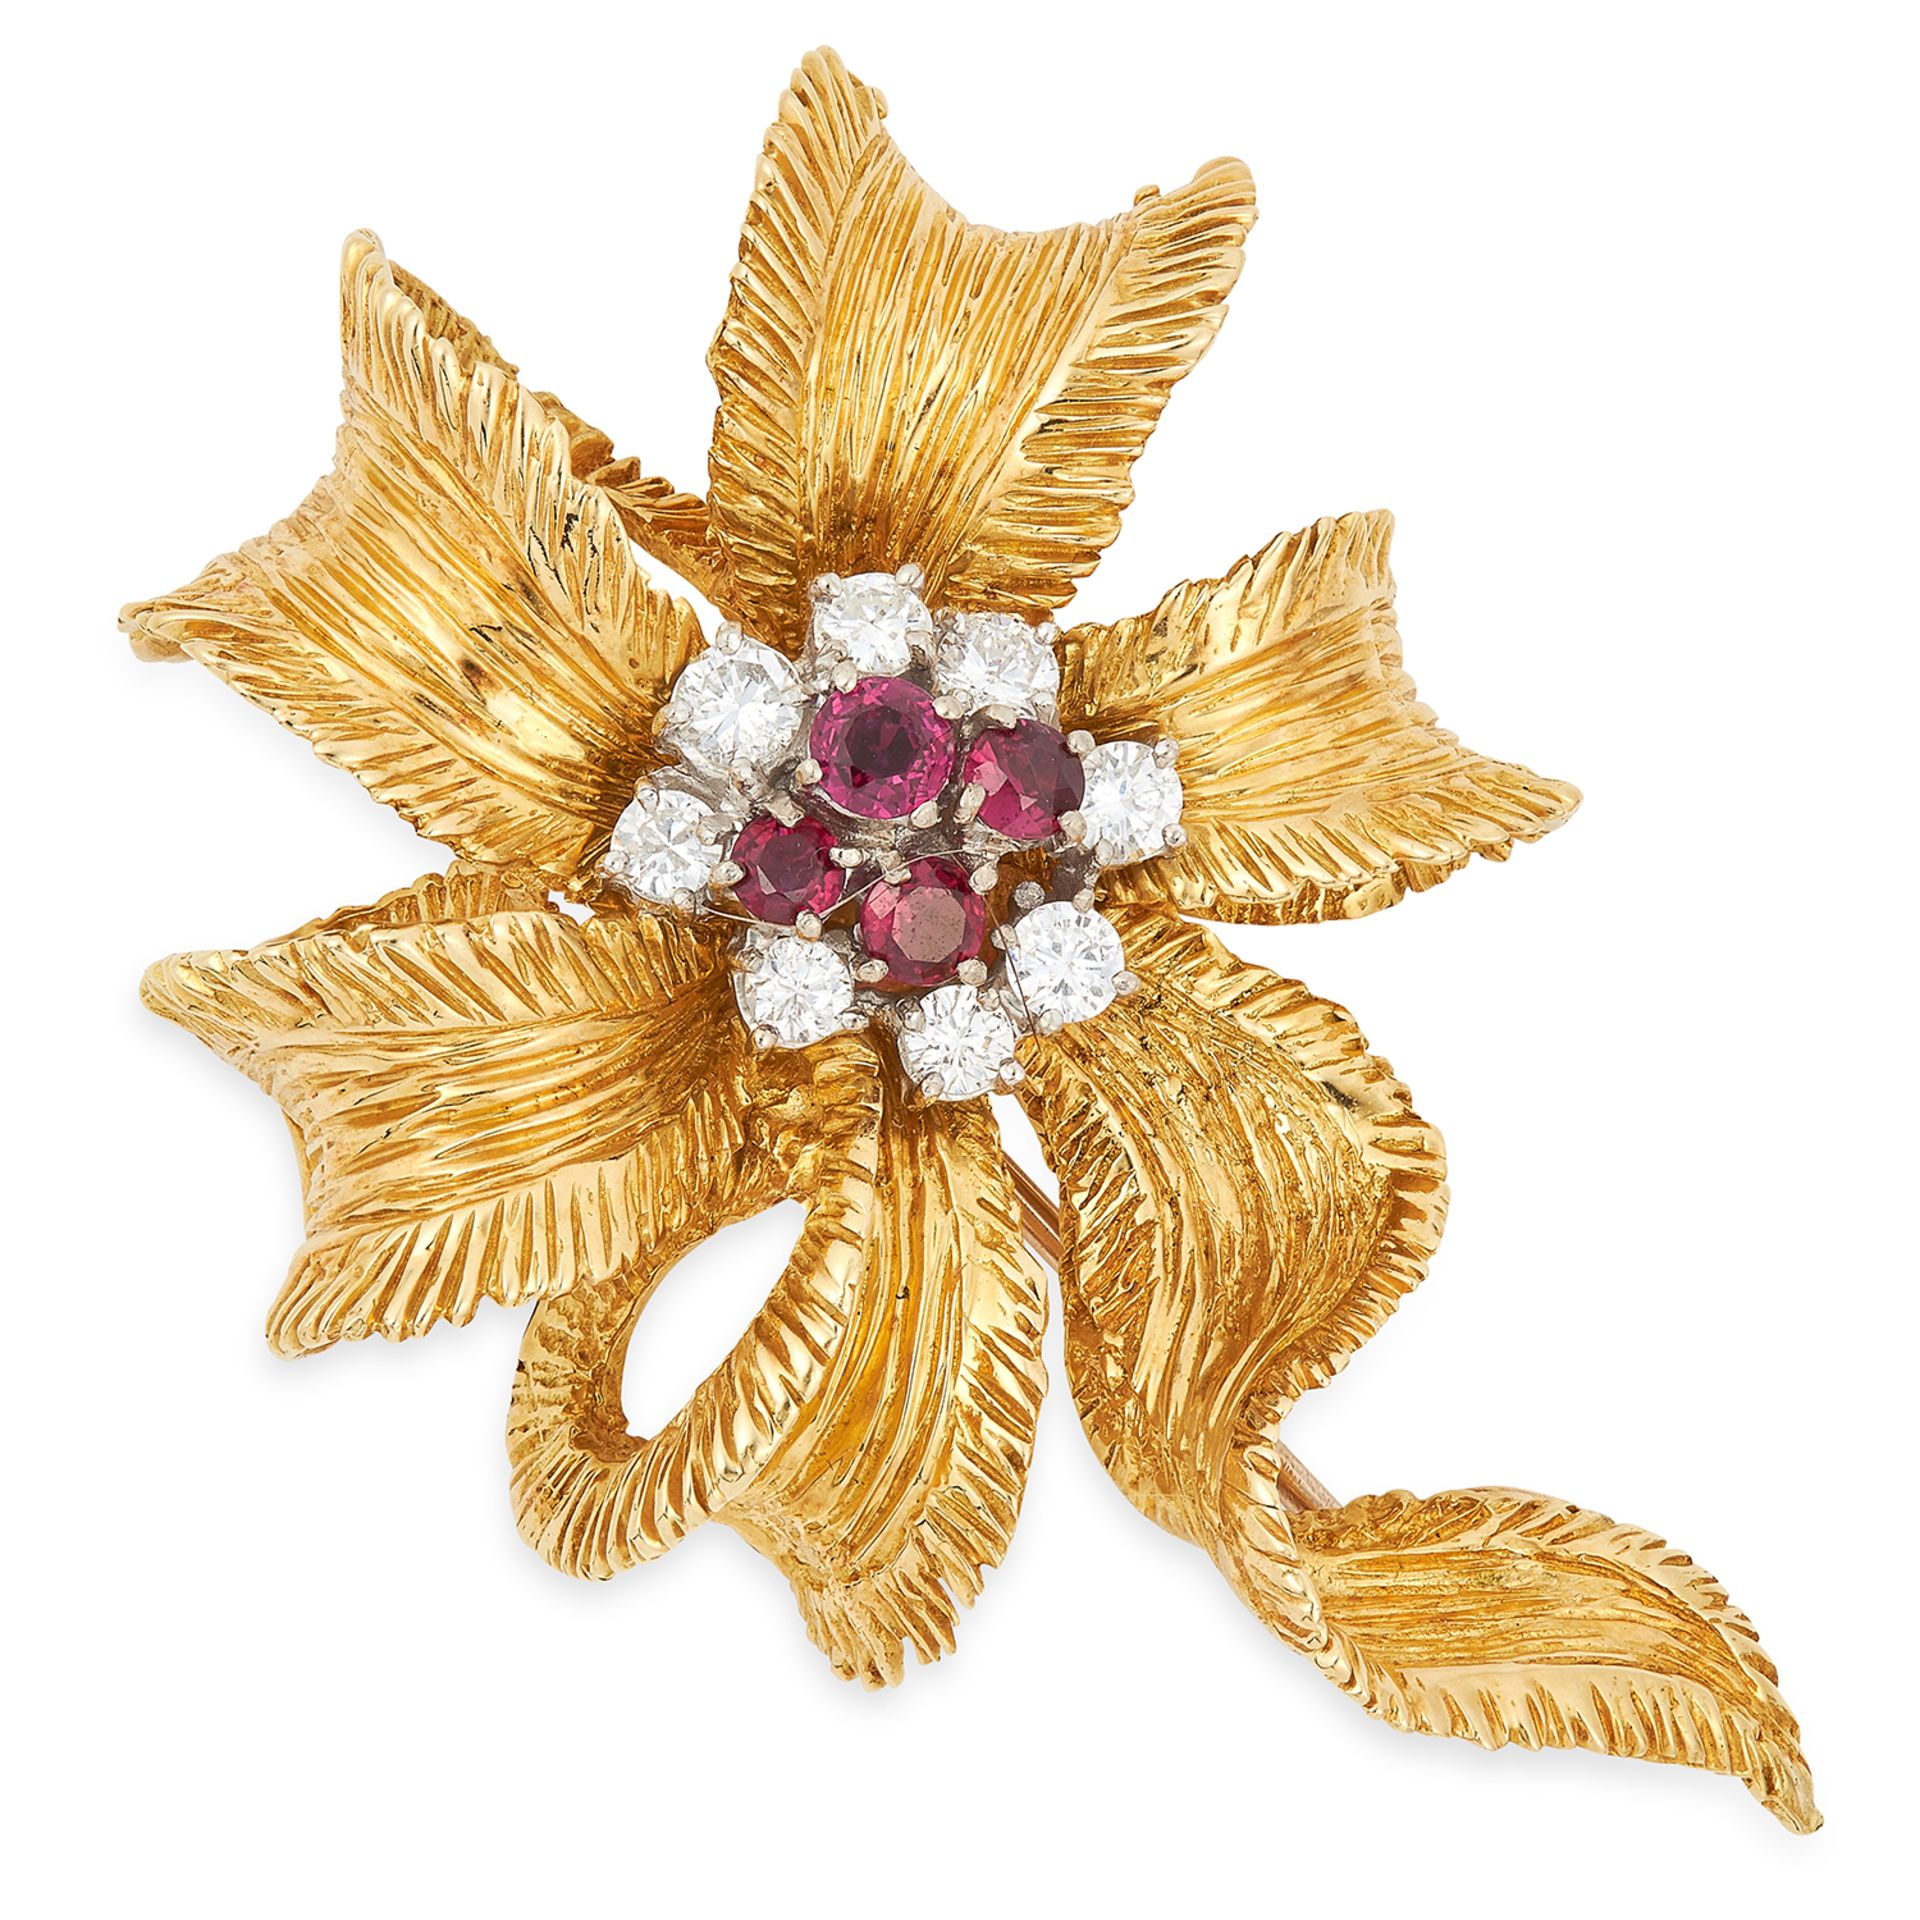 A RUBY AND DIAMOND RIBBON BROOCH, KUTCHINSKY, CIRCA 1960 set with a cluster of round cut rubies